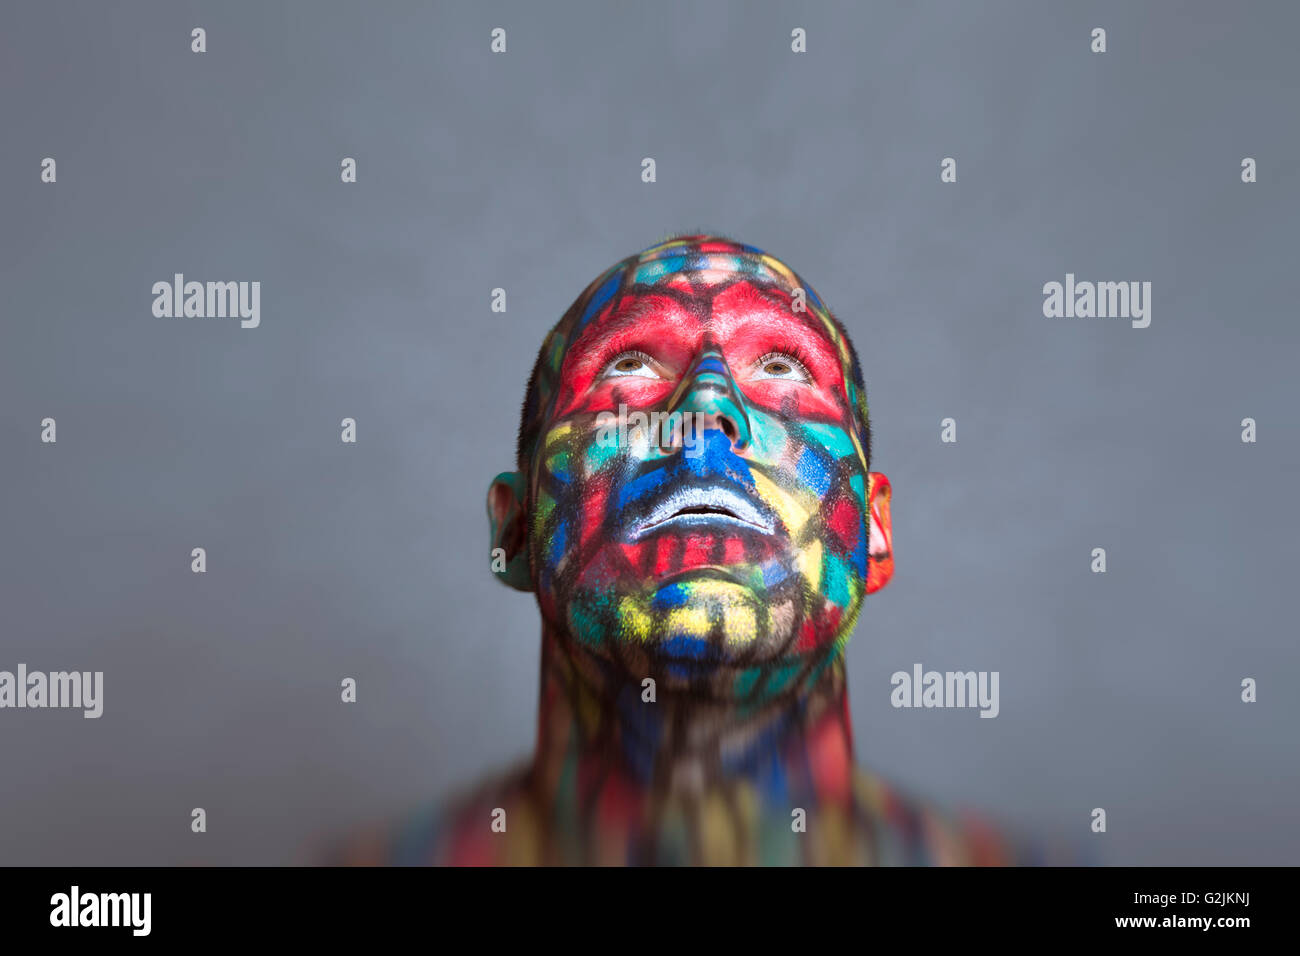 Superhero looking up, colorful face art with tilt shift and motion blur effect. Stock Photo